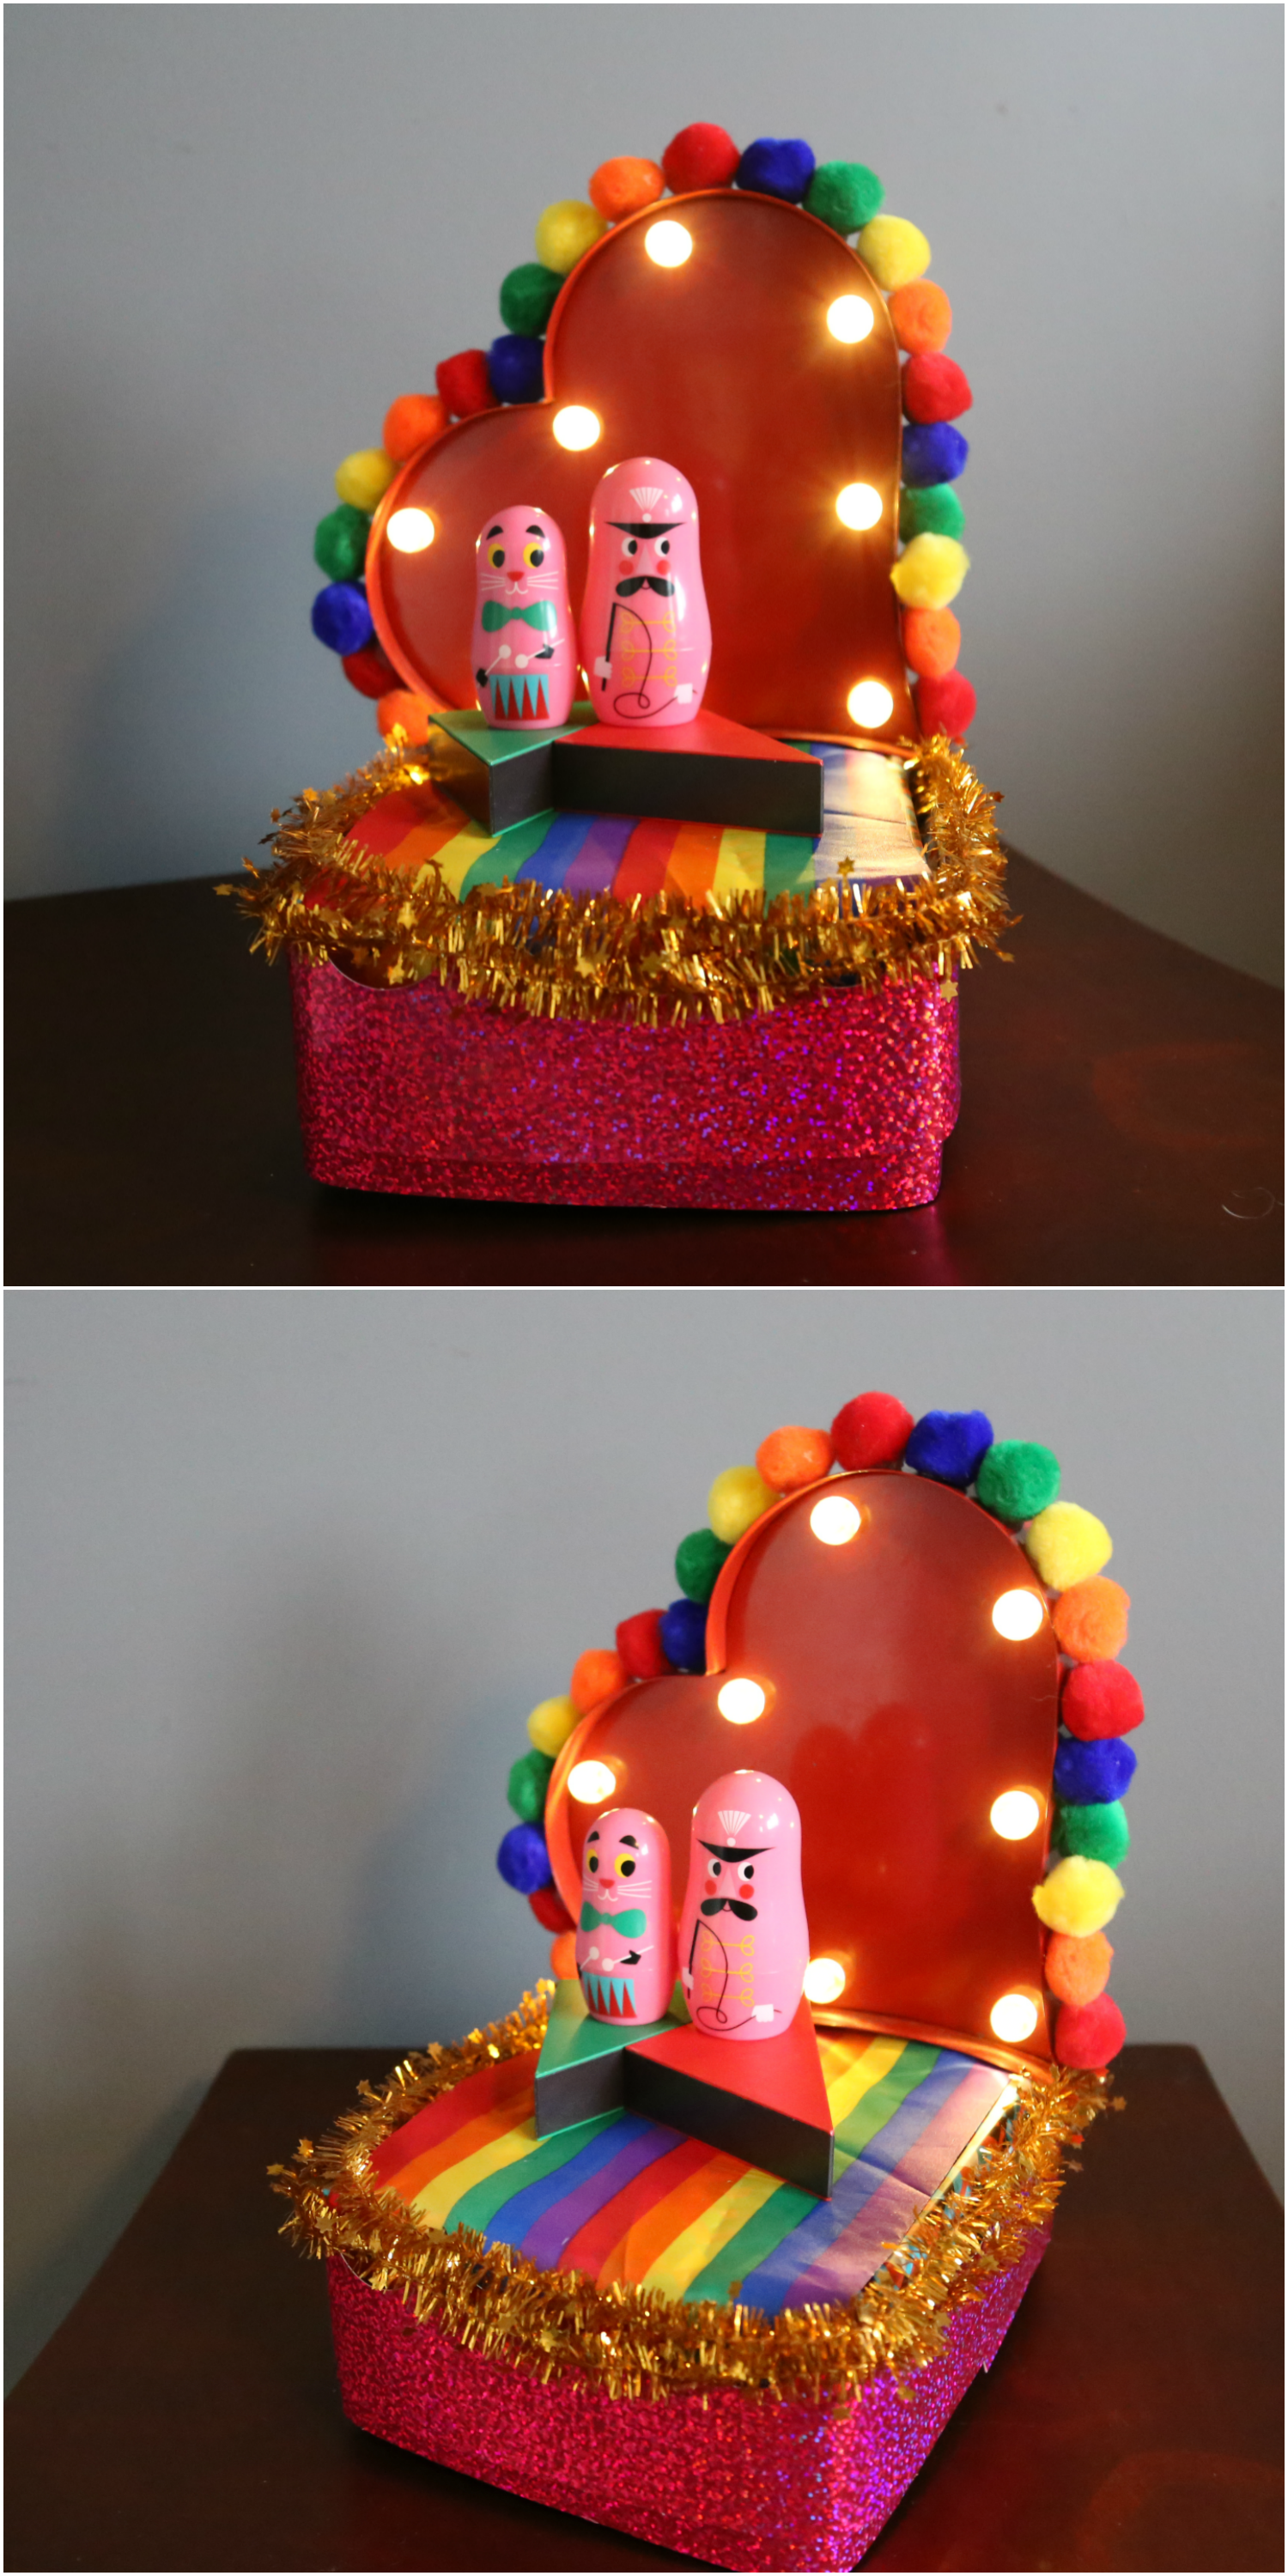 heart shaped box miniature pride parade float with lights, rainbow pompom trim, and two doll figured at the center